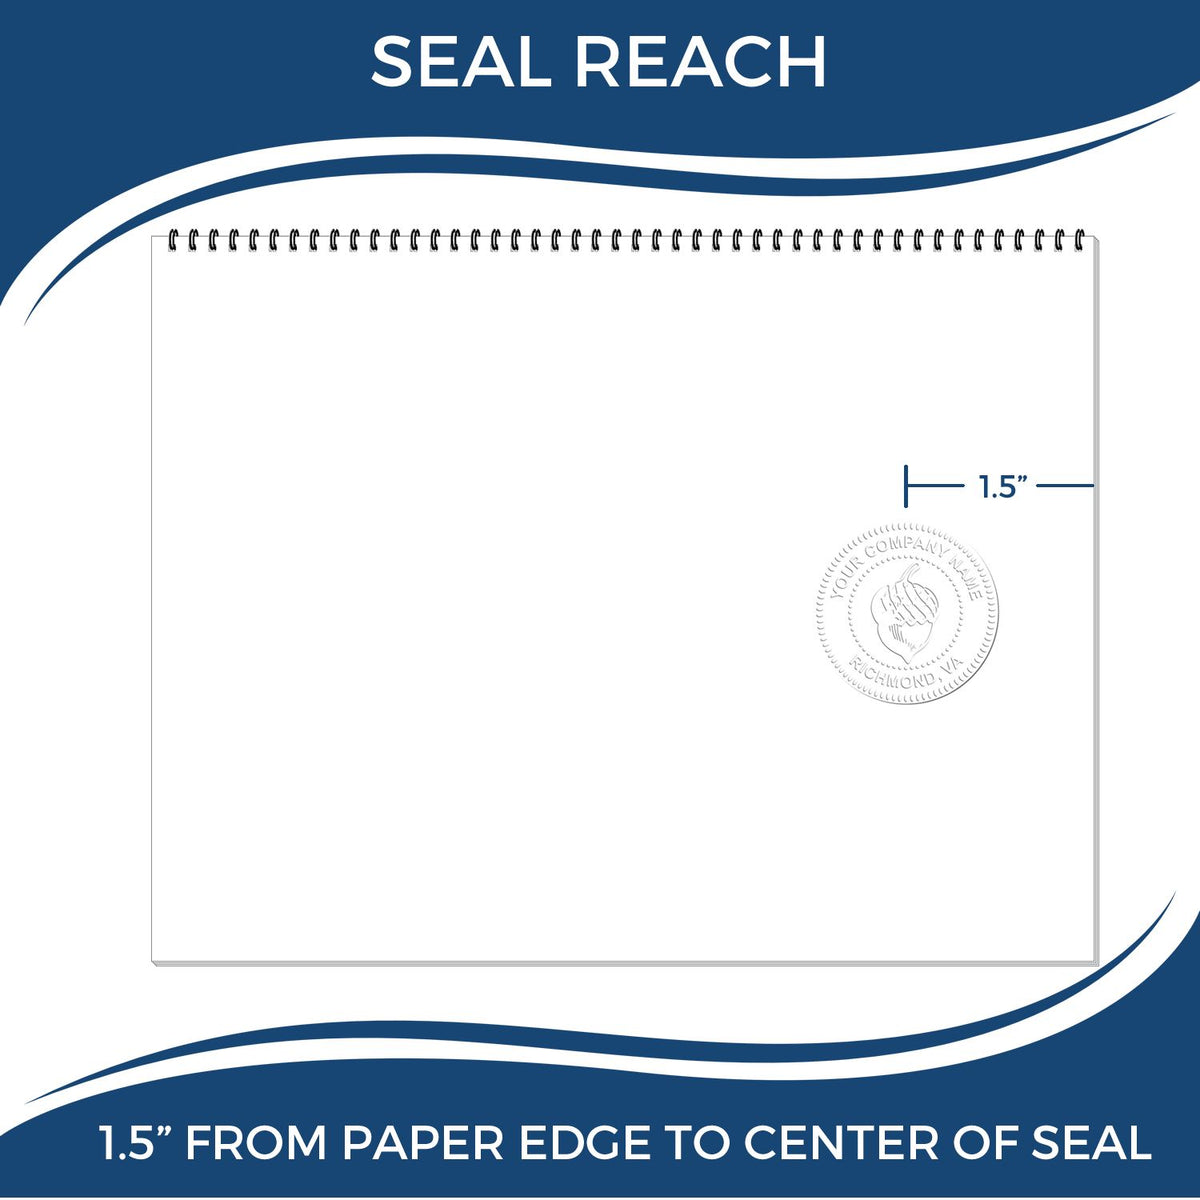 An infographic showing the seal reach which is represented by a ruler and a miniature seal image of the Arizona Desk Architect Embossing Seal